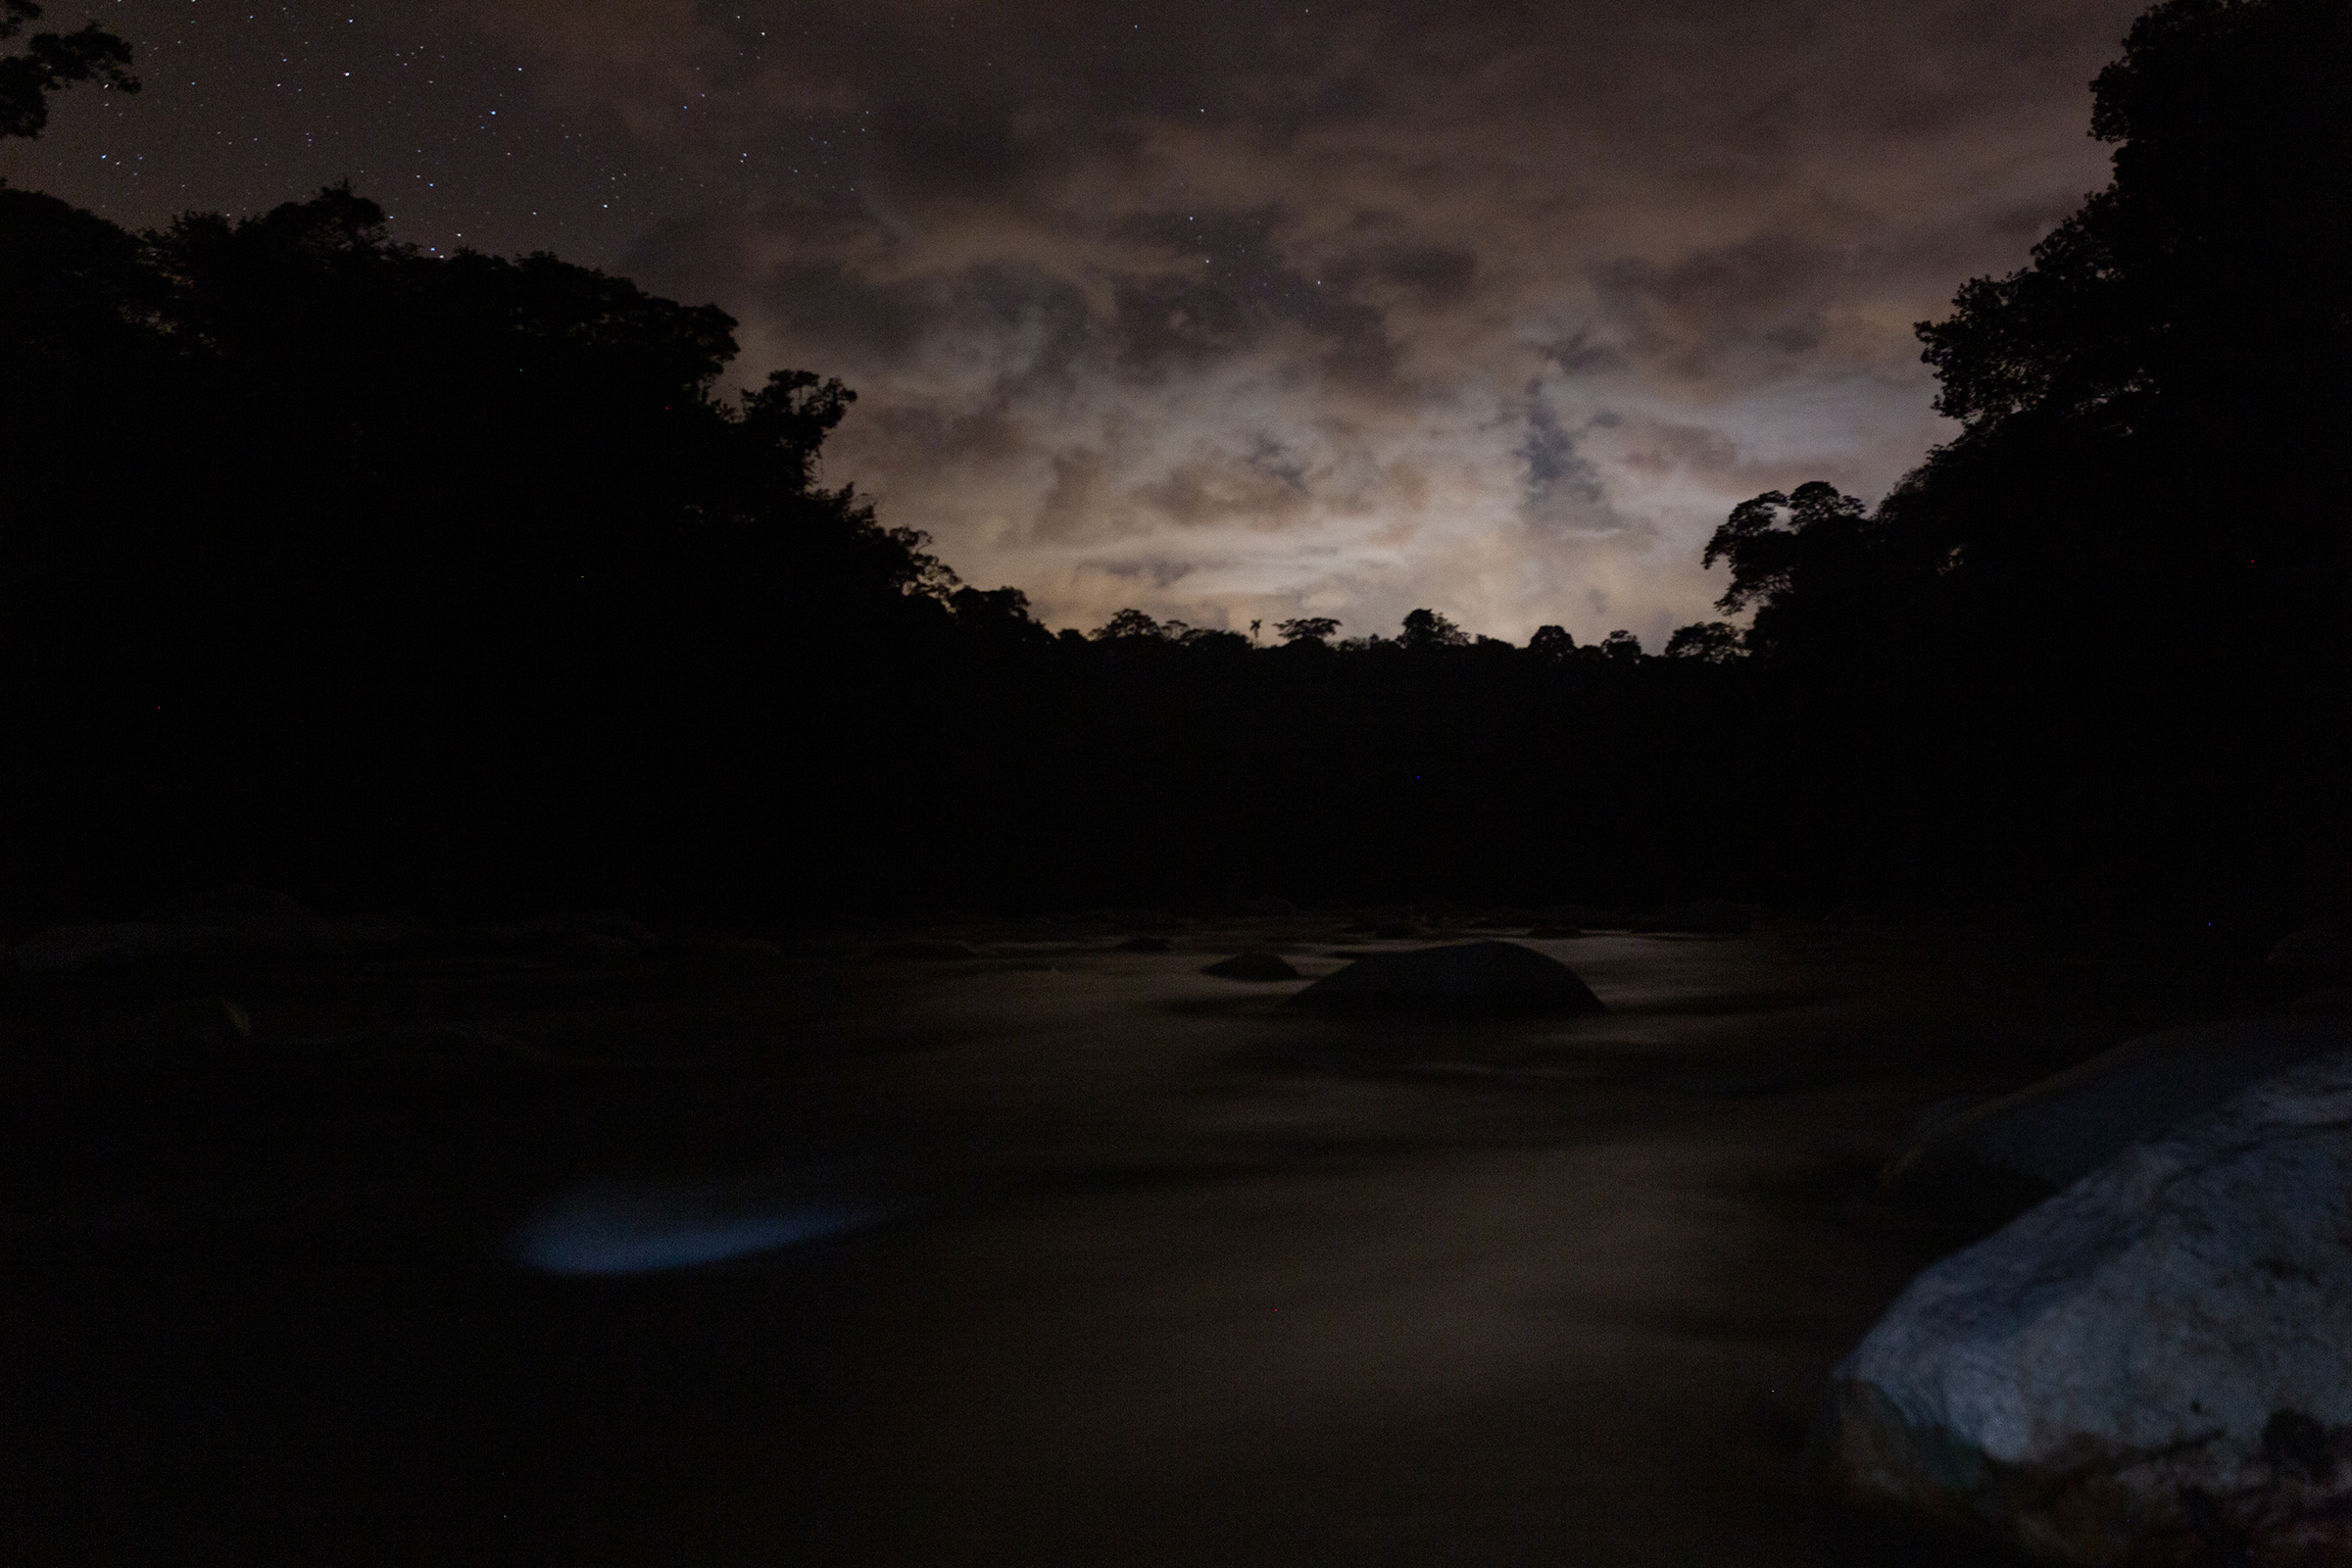 For the Kichwa Indigenous people of Piatúa, the river is sacred. It is a living being, with its own temperament, mood swings, and pulse. It is revered and feared, loved and protected. (Andrés Yépez for TIME)